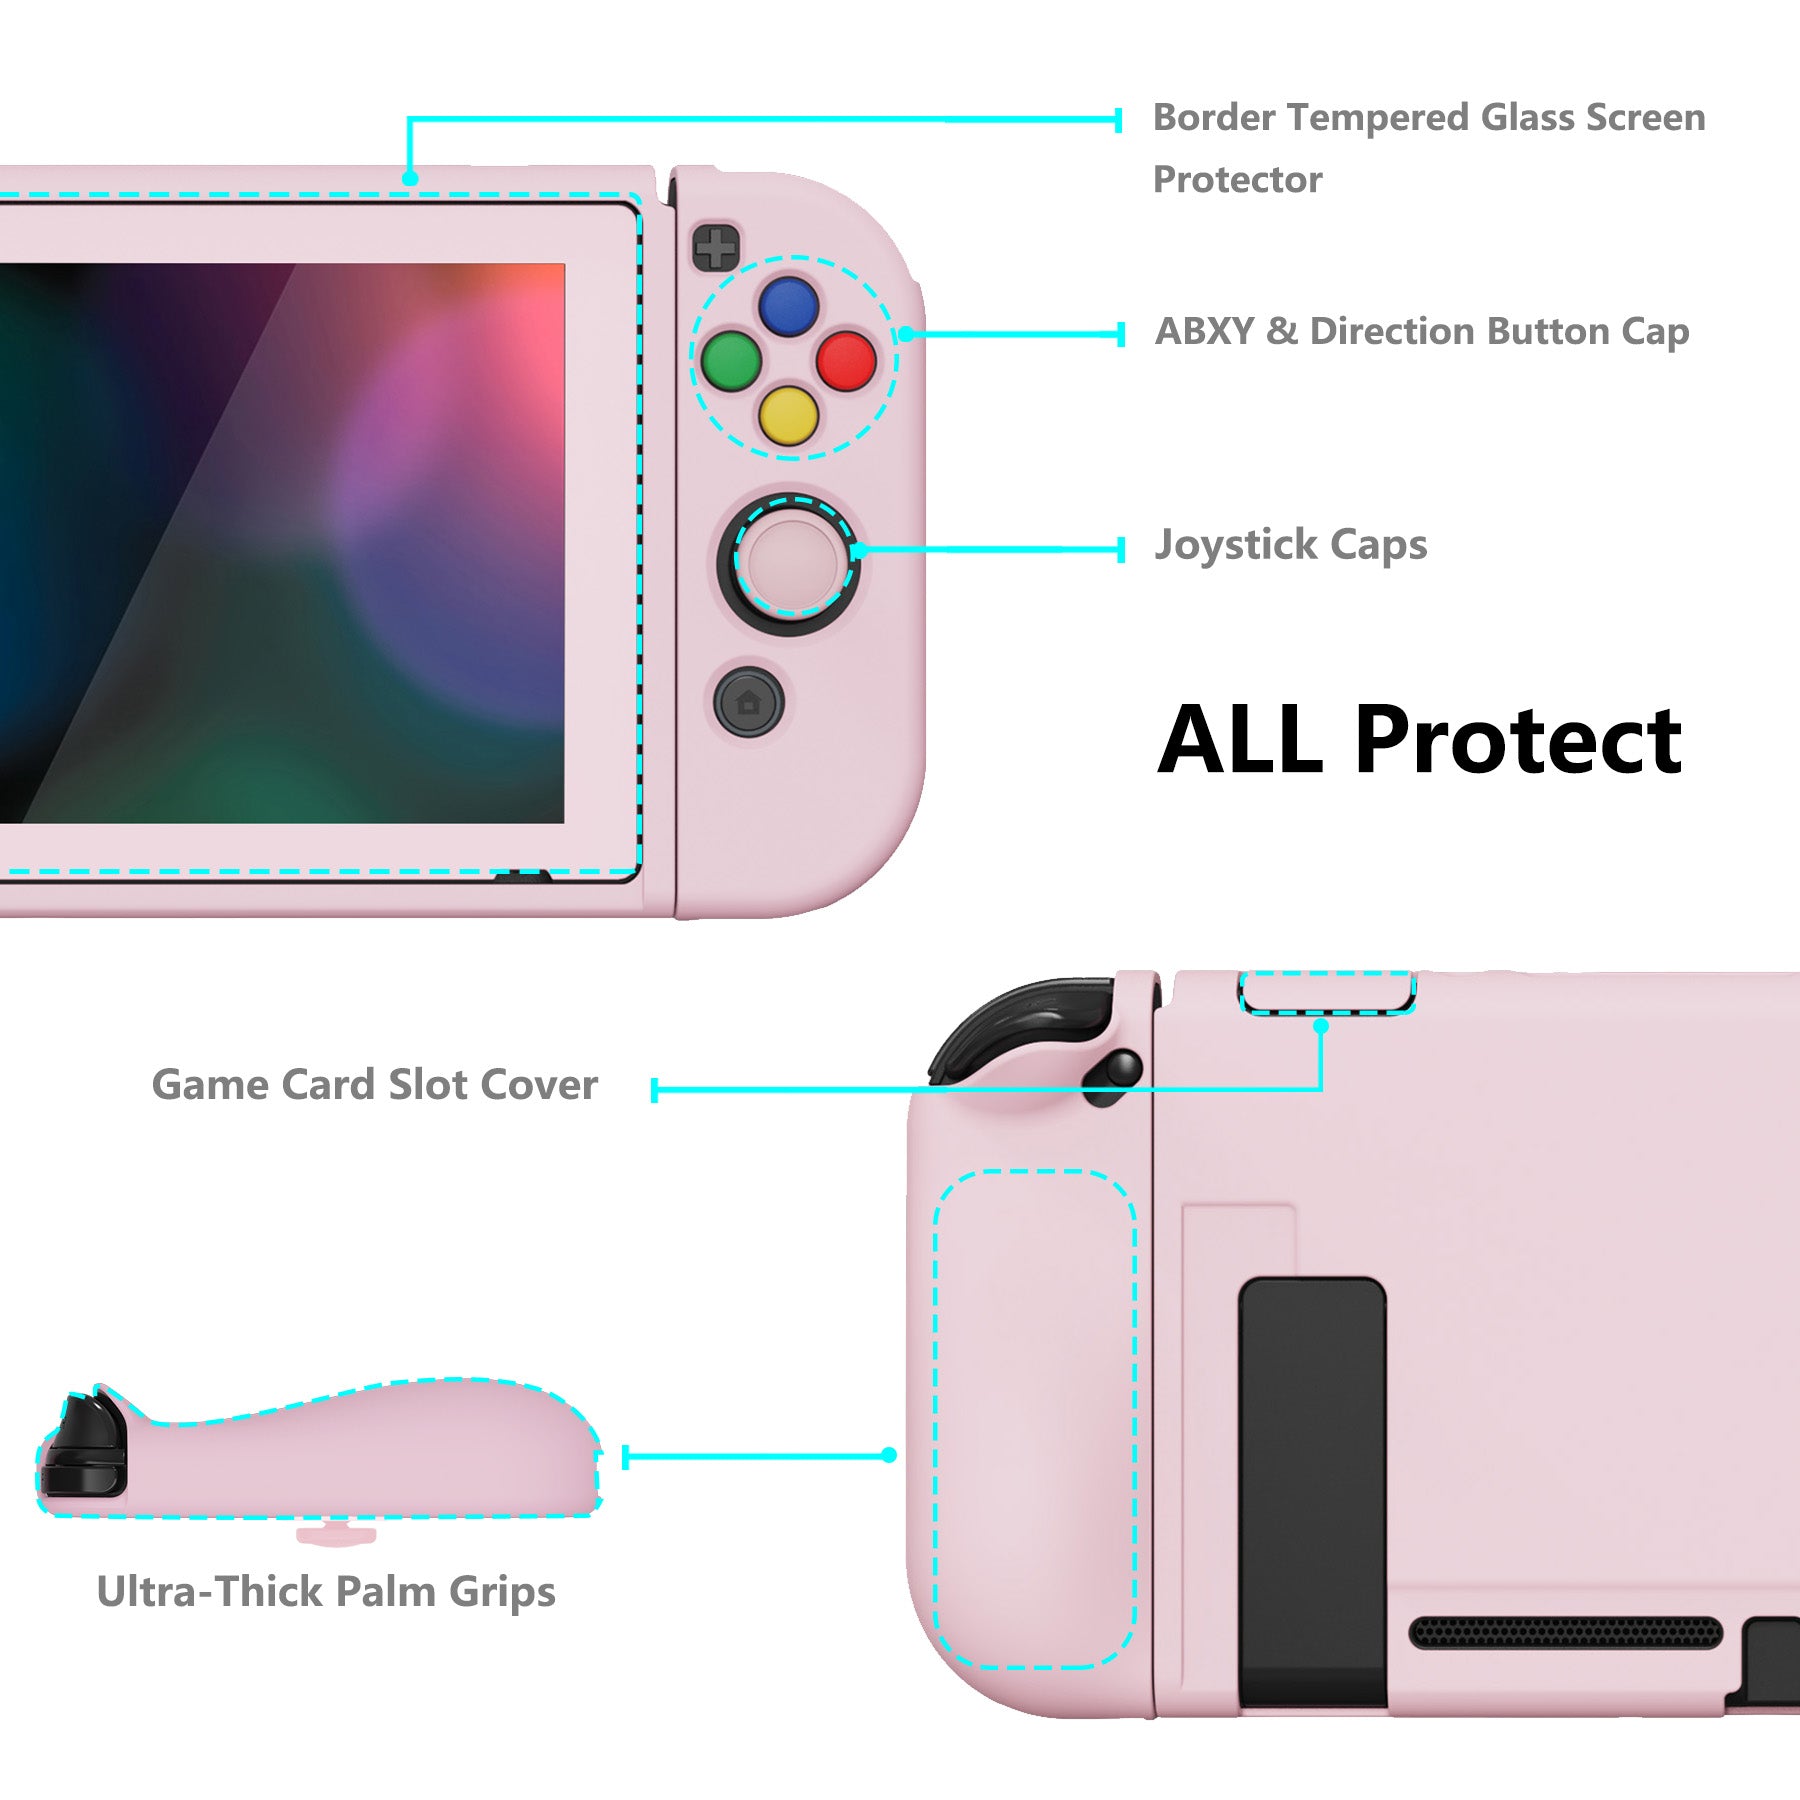 PlayVital ZealProtect Soft Protective Case for Nintendo Switch, Flexible Cover for Switch with Tempered Glass Screen Protector & Thumb Grips & ABXY Direction Button Caps - Cherry Blossoms Pink - RNSYM5002 playvital